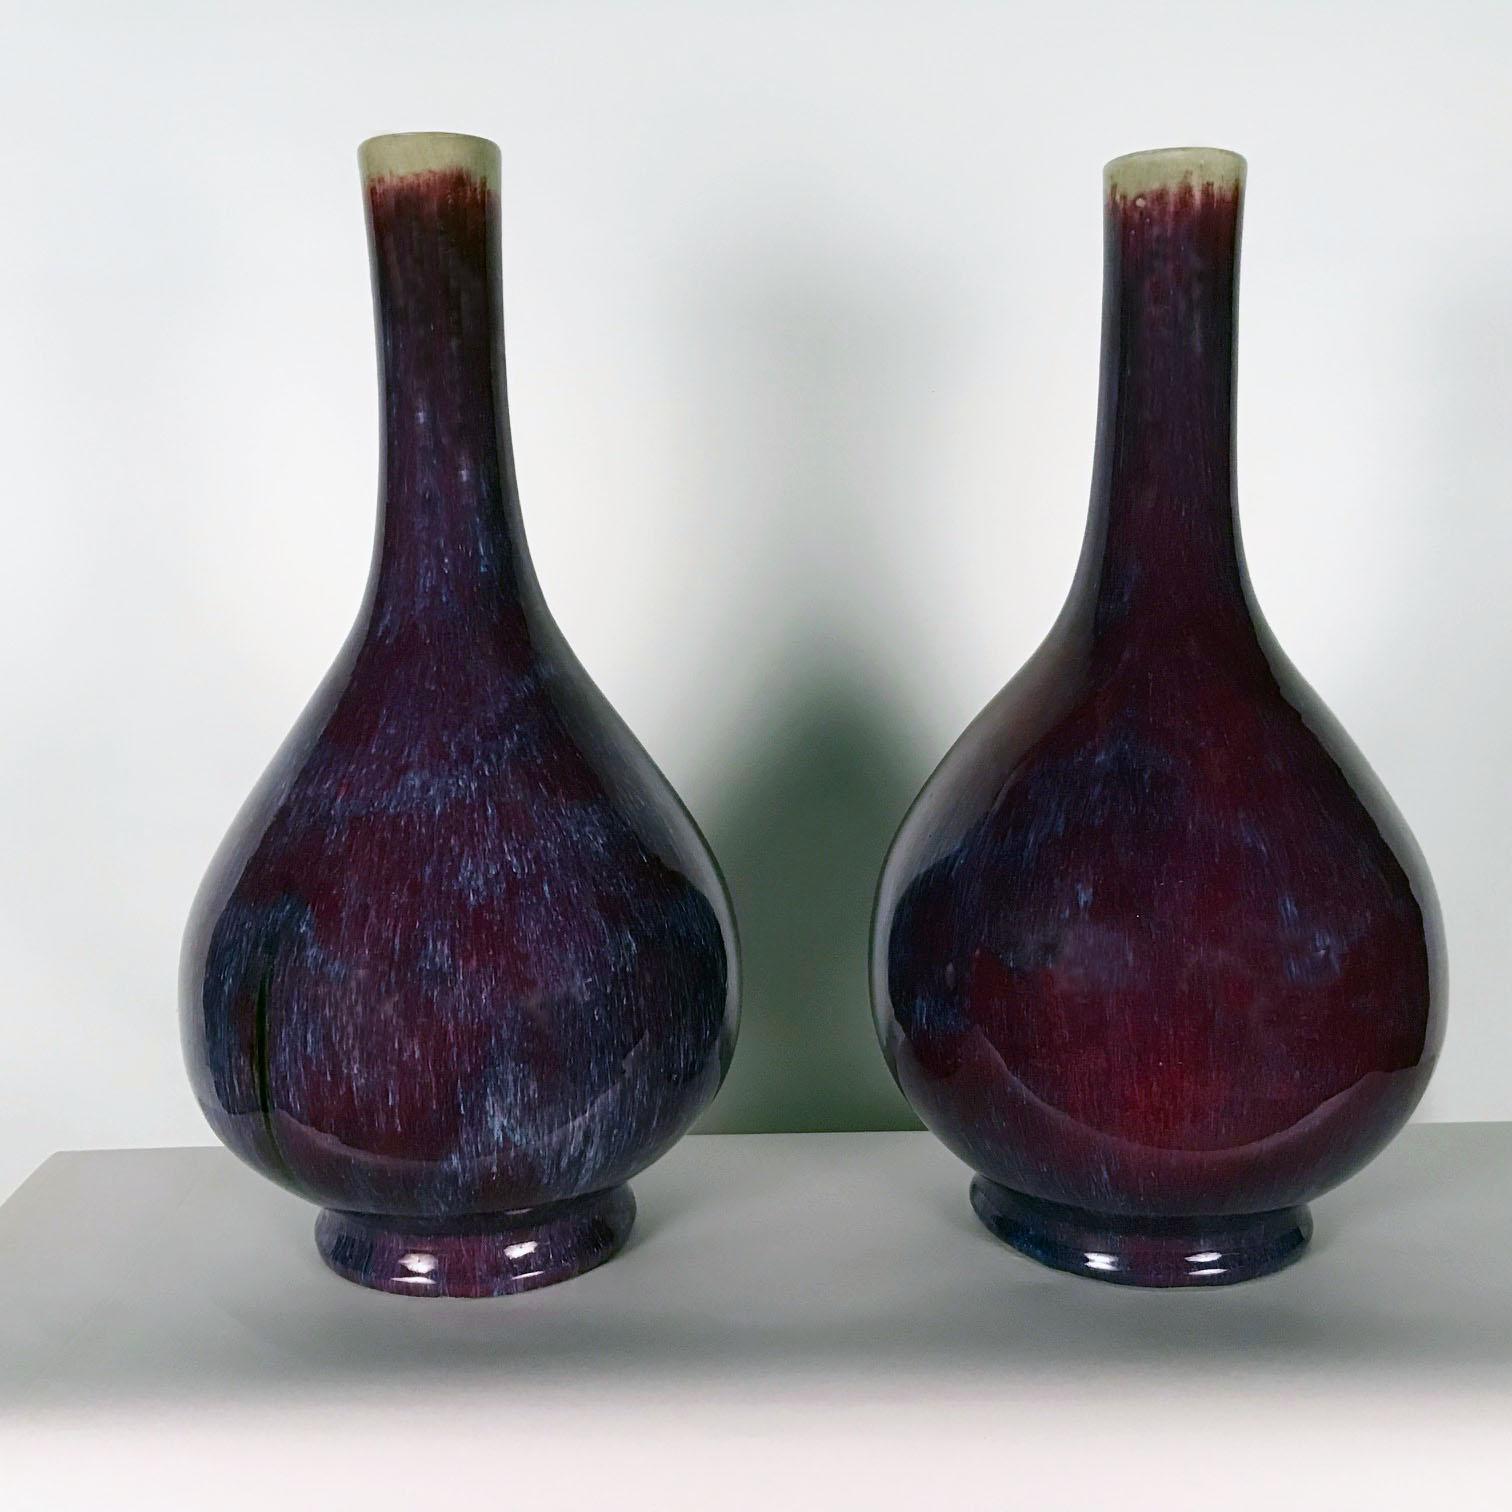 Chinese Export Large Pair of Antique Chinese Sang Boeuf Pear-Shaped Vases